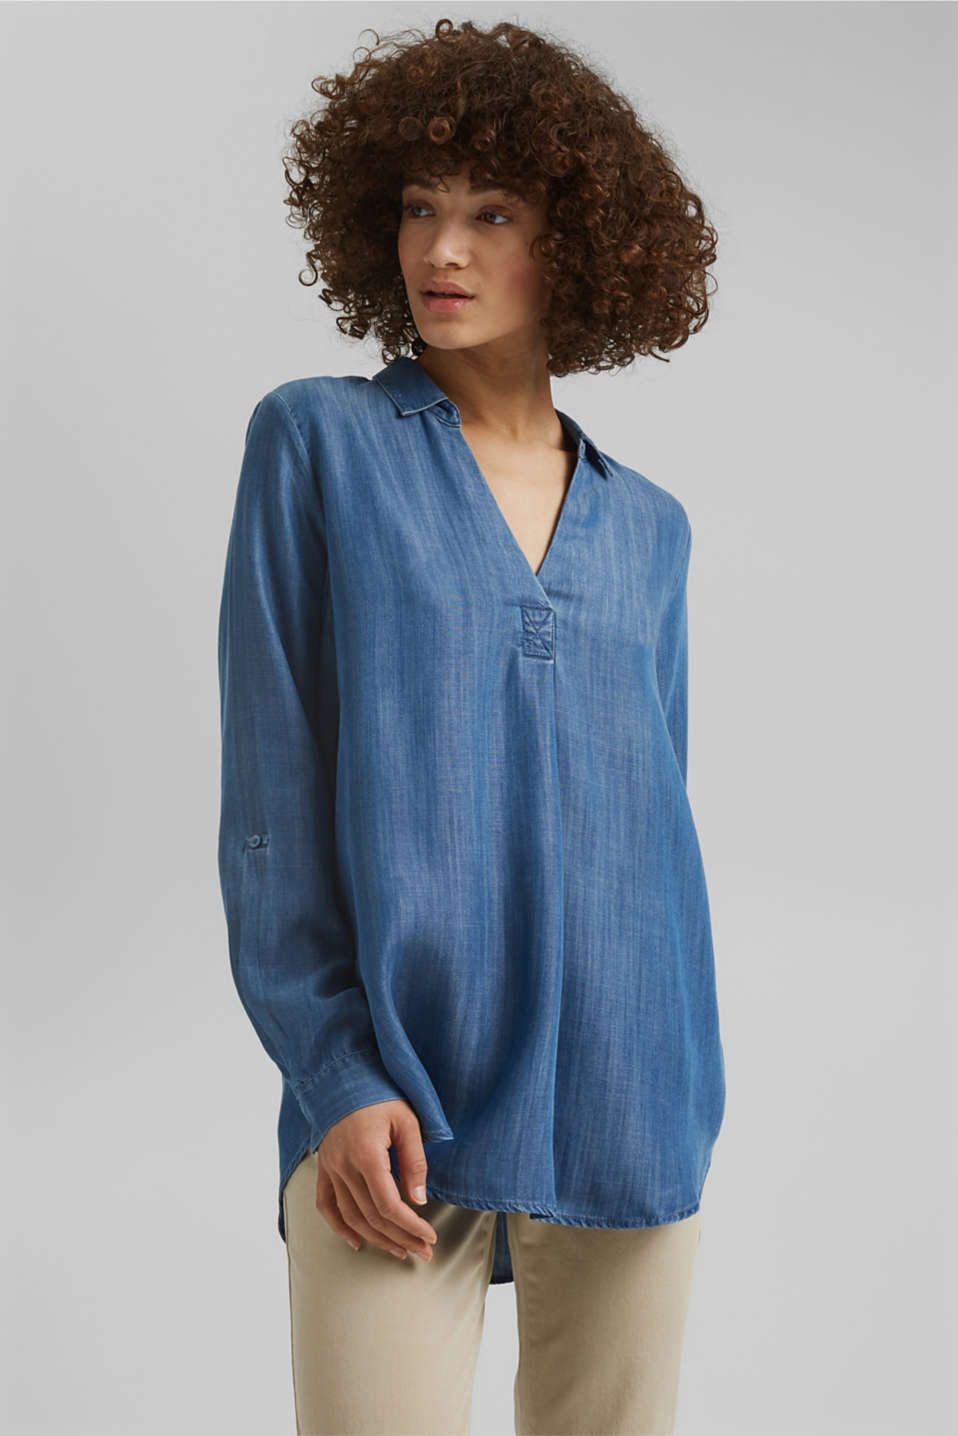 Esprit - Made of TENCEL™ lyocell: Denim blouse at our Online Shop